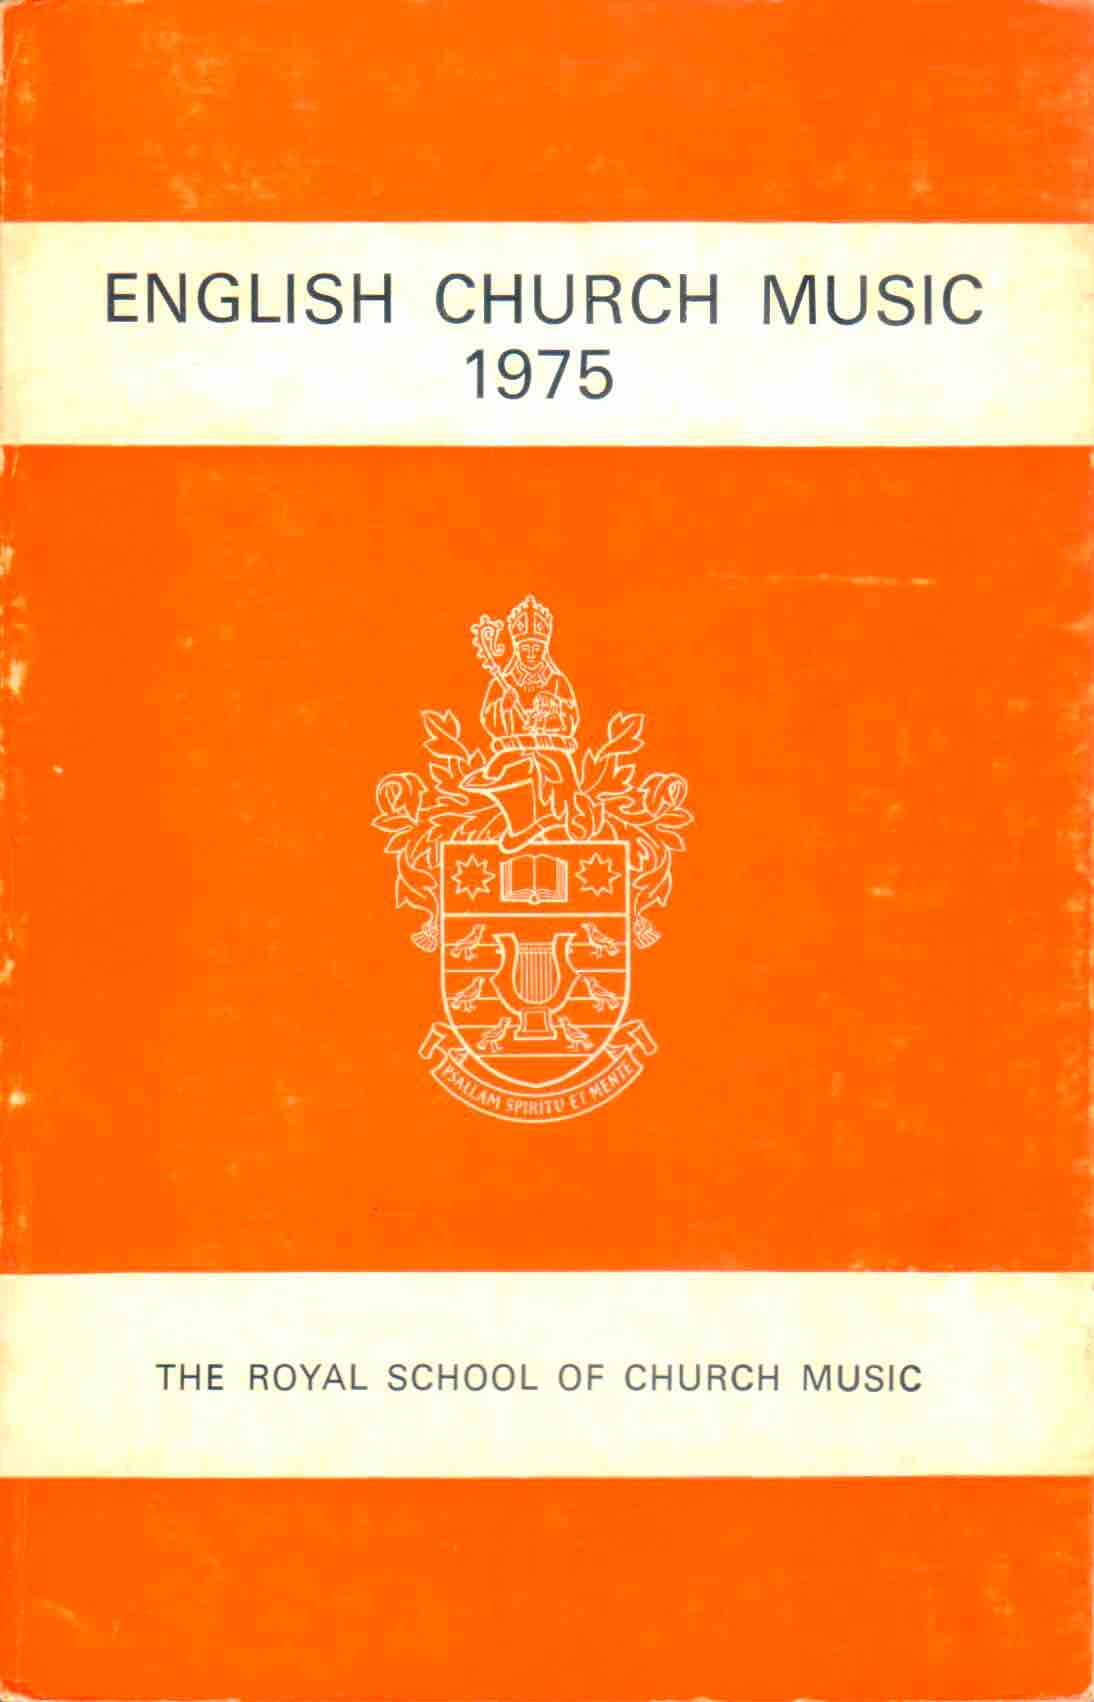 Cover of English Church Music 1975